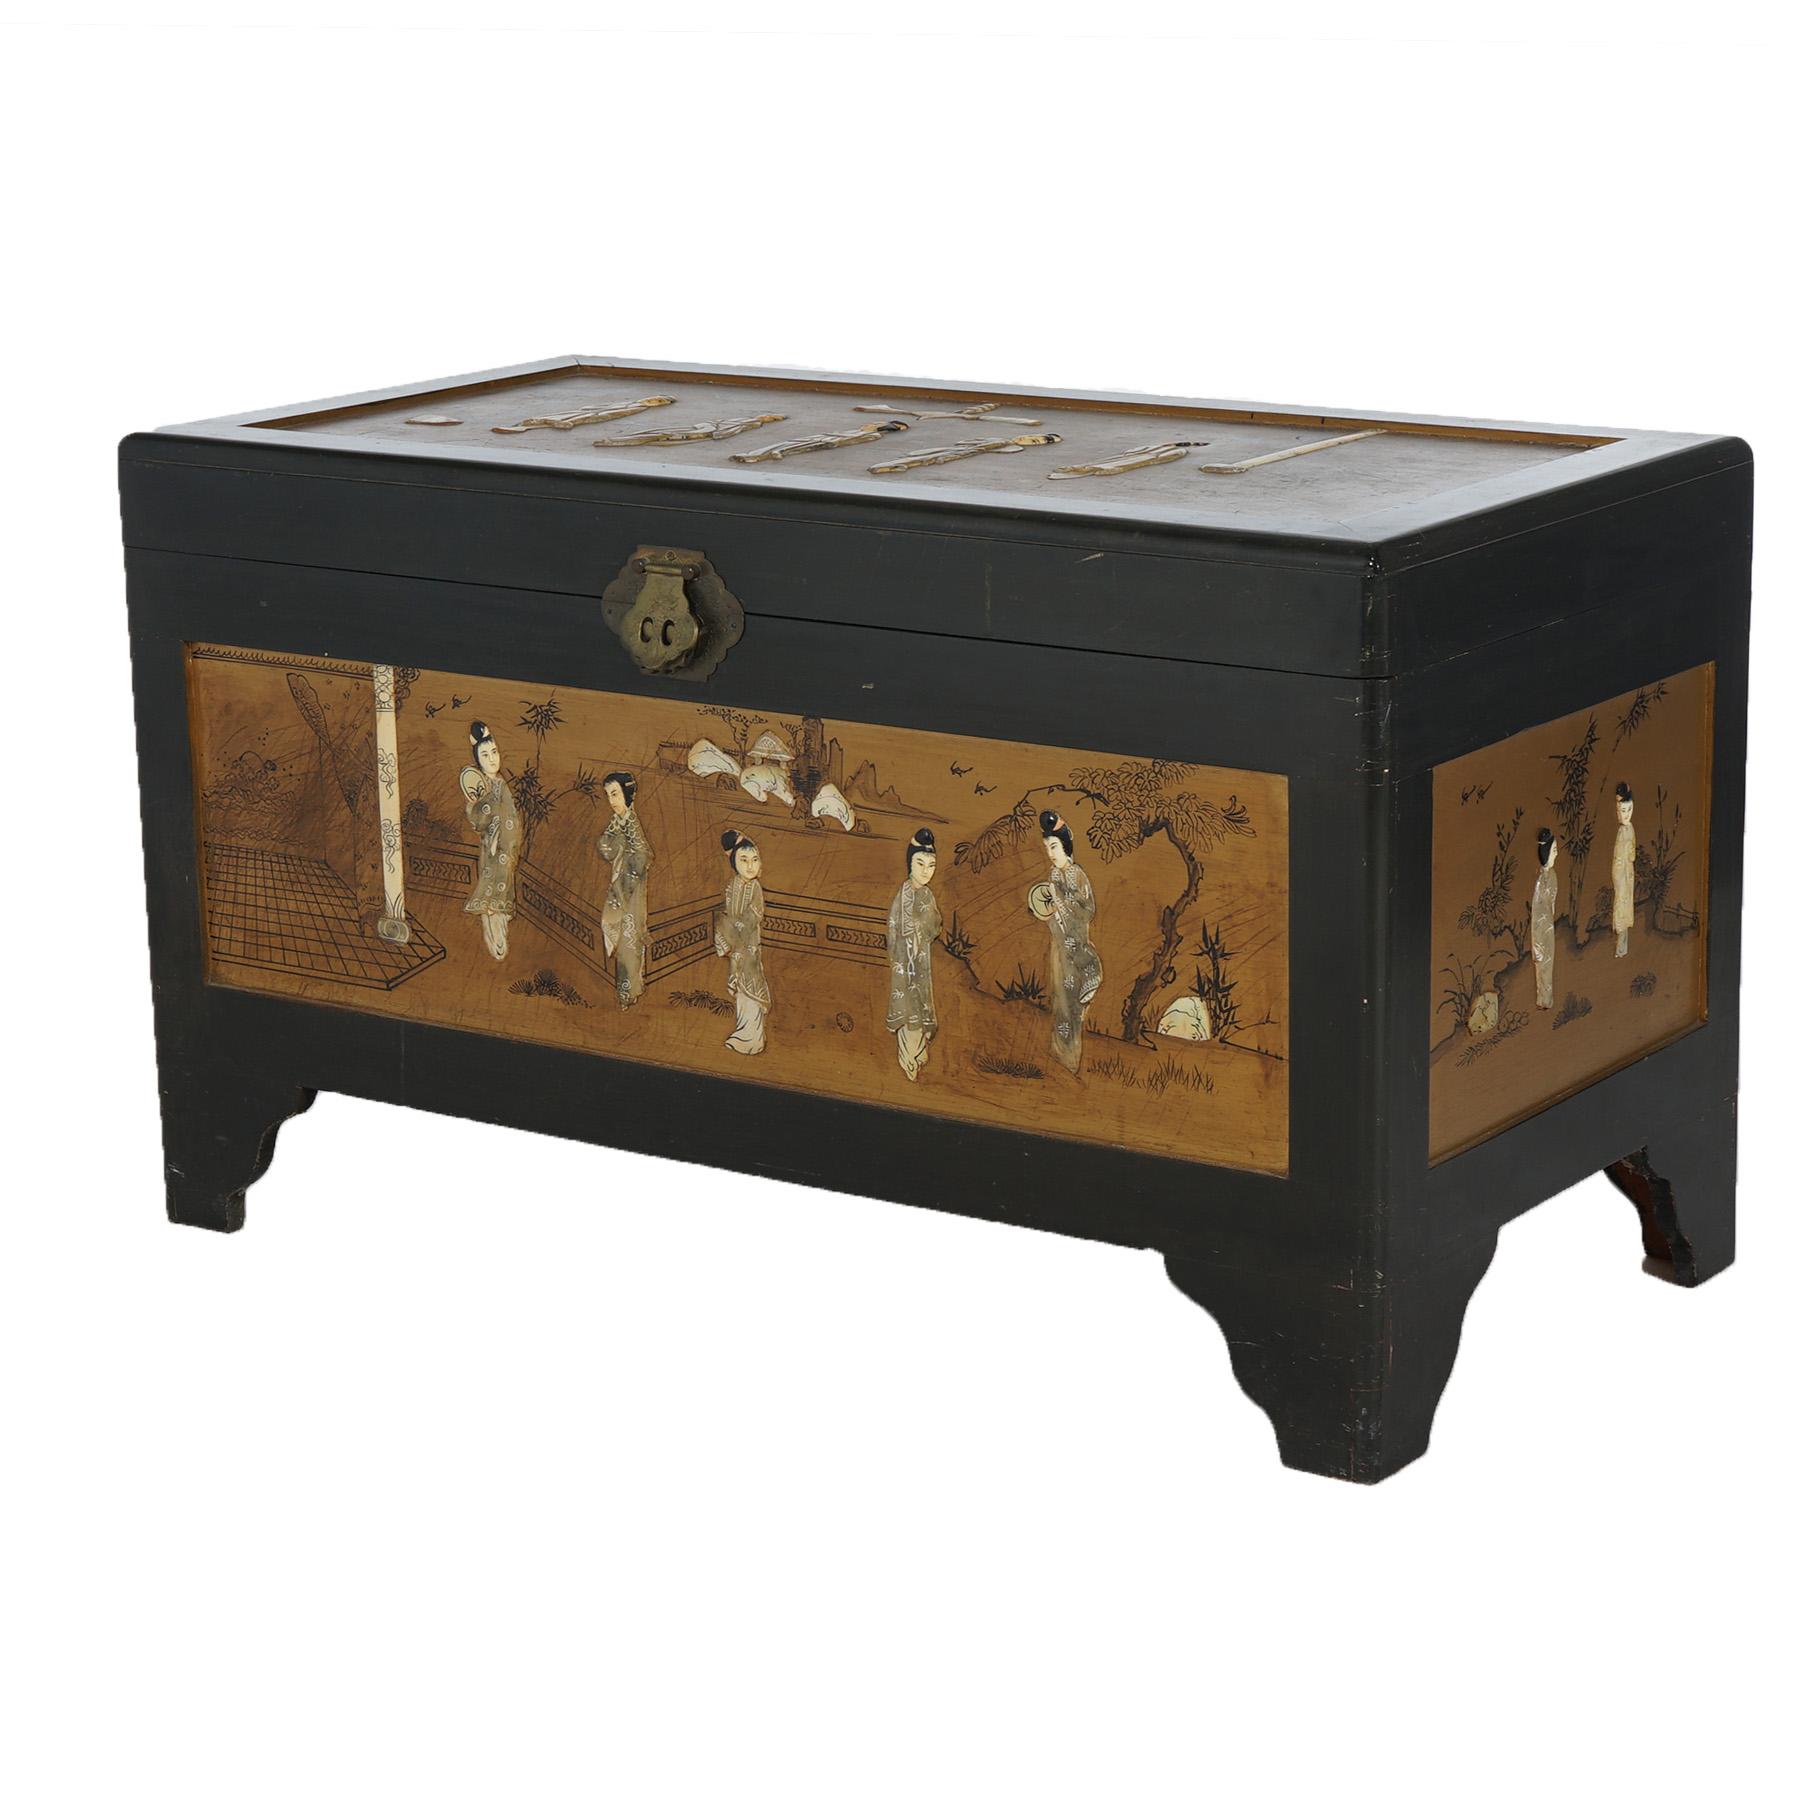 ***Ask About Reduced In-House Delivery Rates - Reliable Professional Service & Fully Insured***
Antique Chinese Lacquered Ebonized & Gilt Blanket Chest with Mother of Pearl & Soapstone Inlaid Figures, c1920

Measures - 23